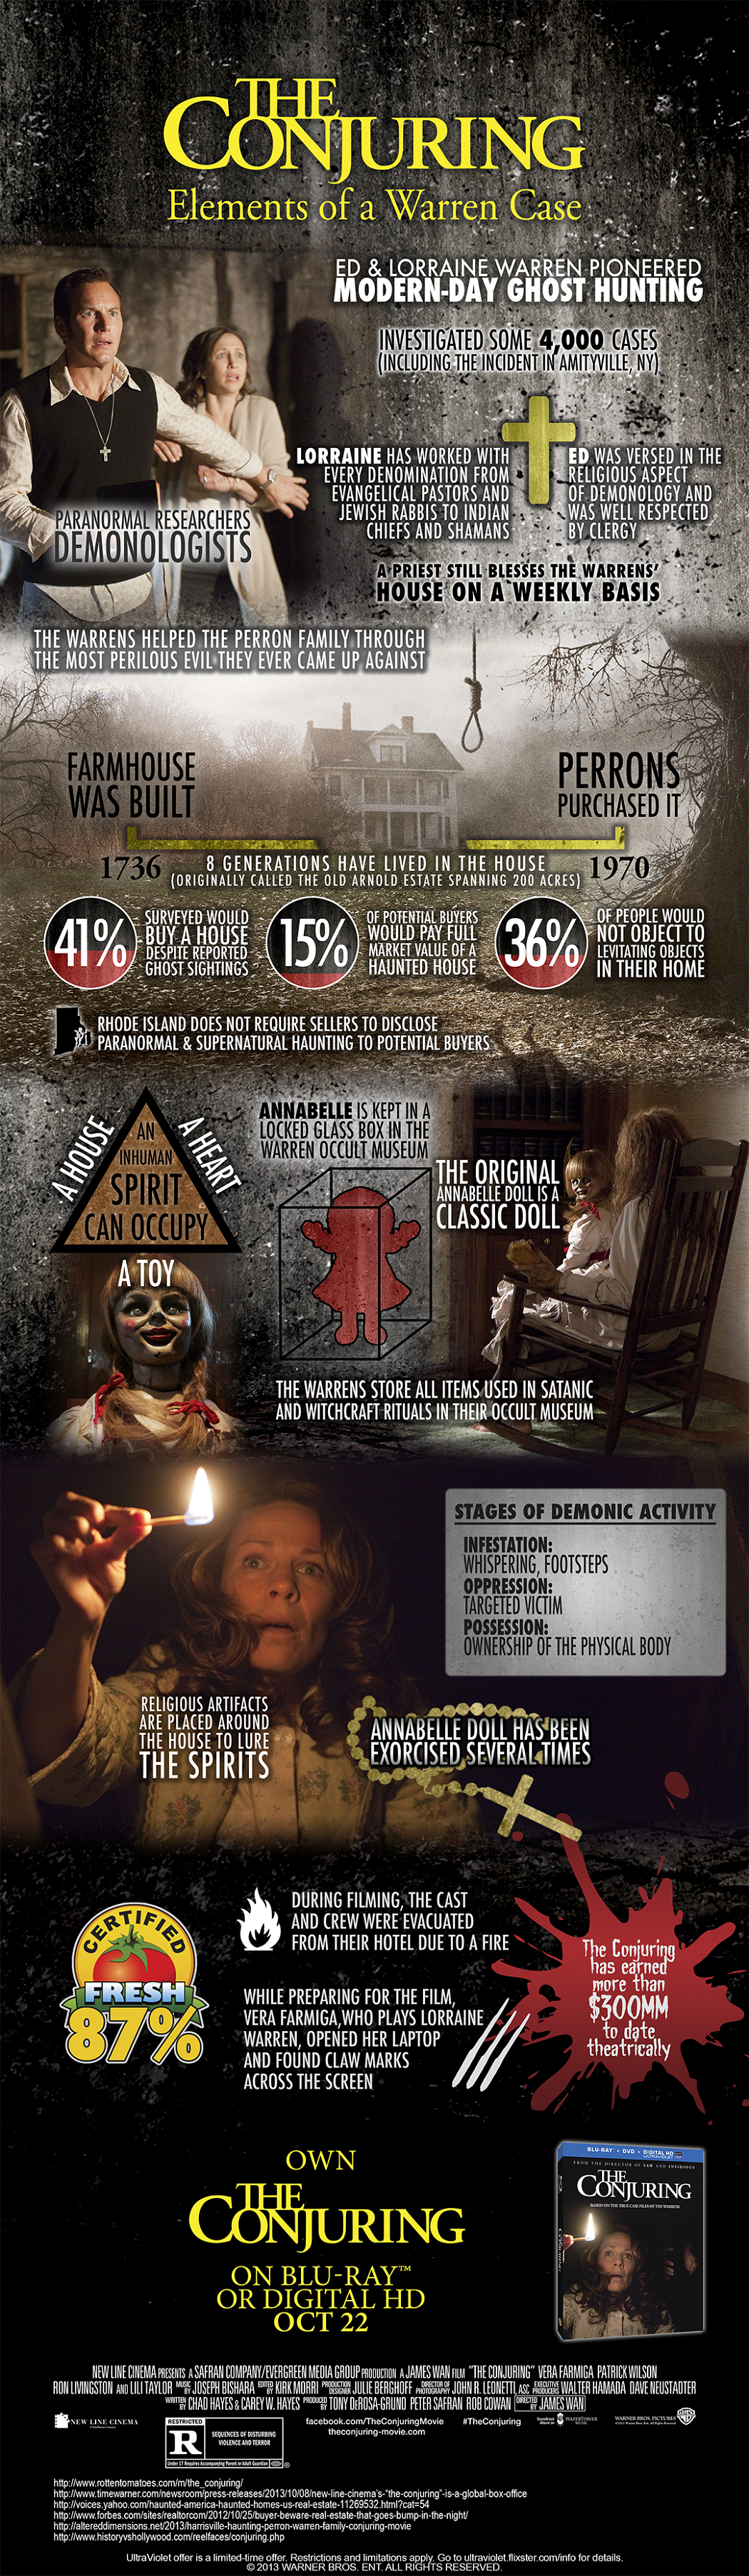 ConjuringInfographic(2) - Copy